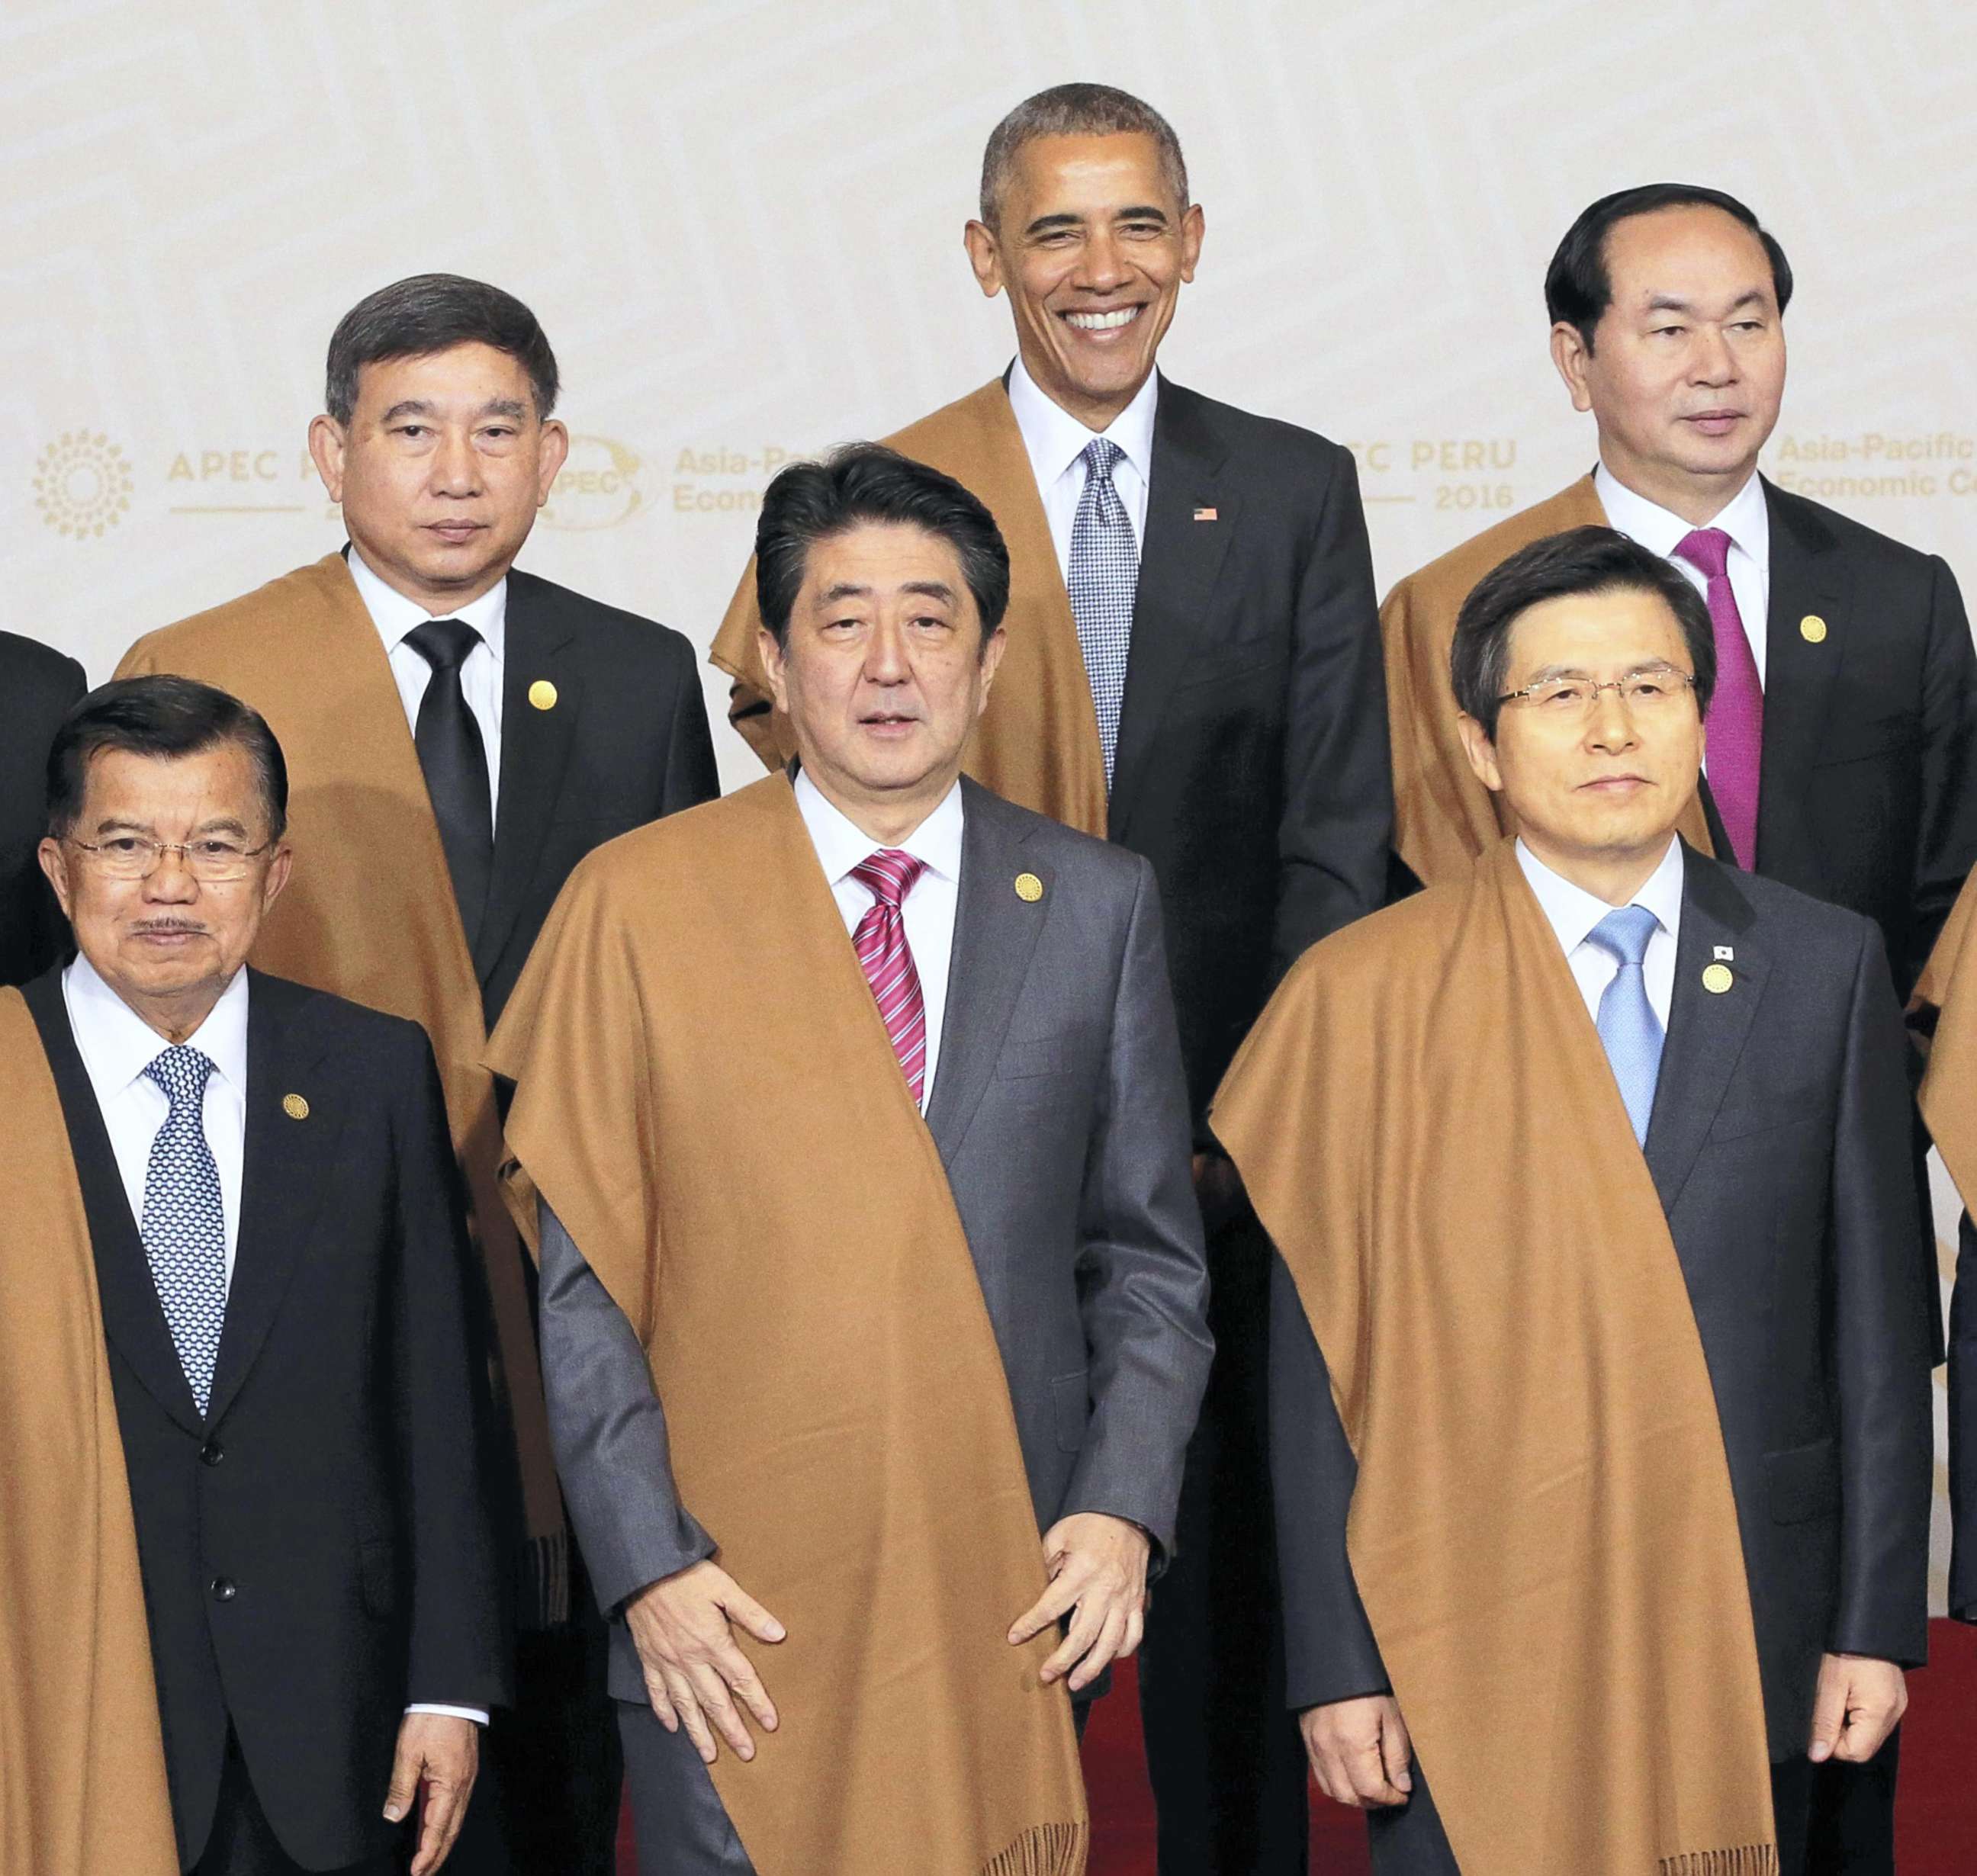 PHOTO: Japanese Prime Minister Shinzo Abe(front,C), U.S. President Barack Obama(rear,C), pose with participant summit leaders after a photo session of the Asia-Pacific Economic Cooperation (APEC) meeting in Lima, Peru on Nov.20,2016.